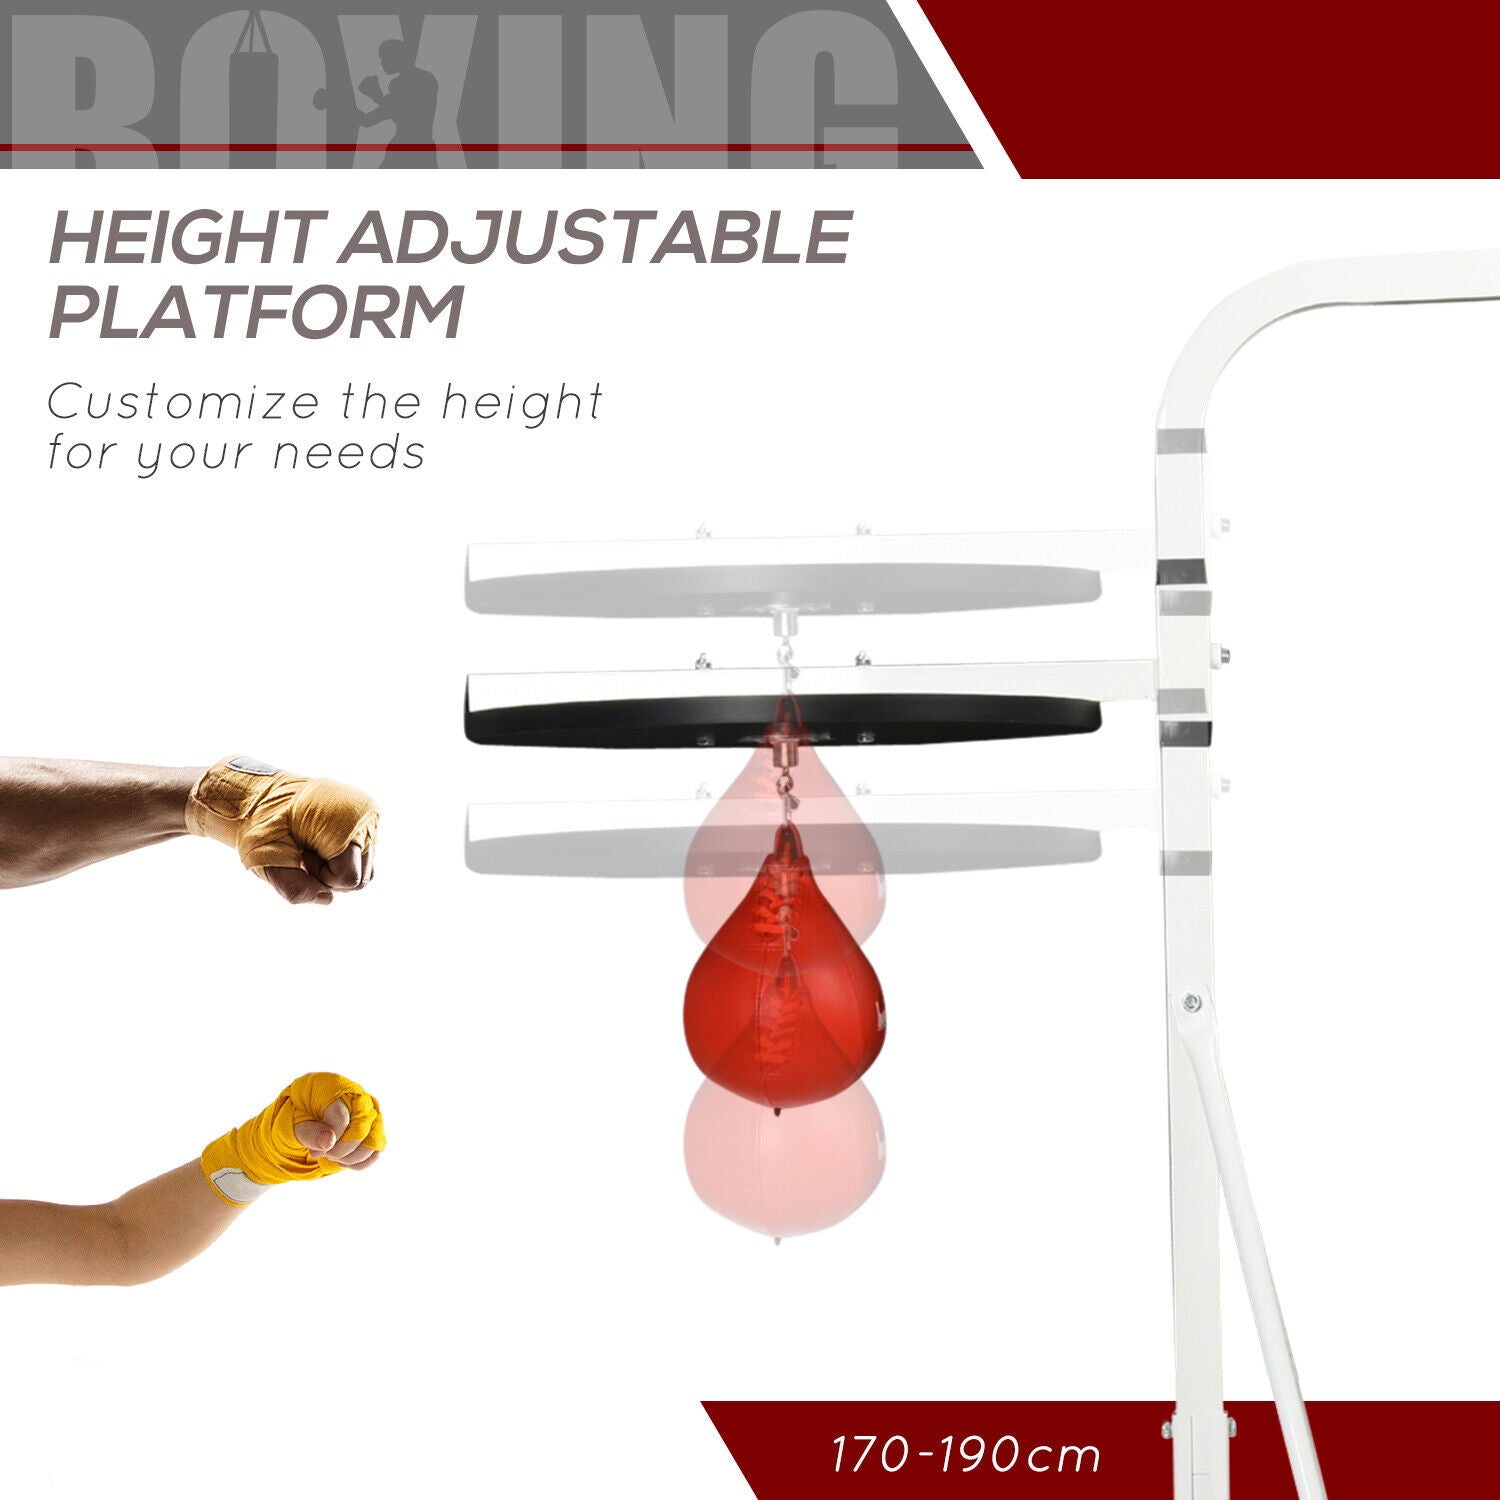 Freestanding Punch Bag Stand